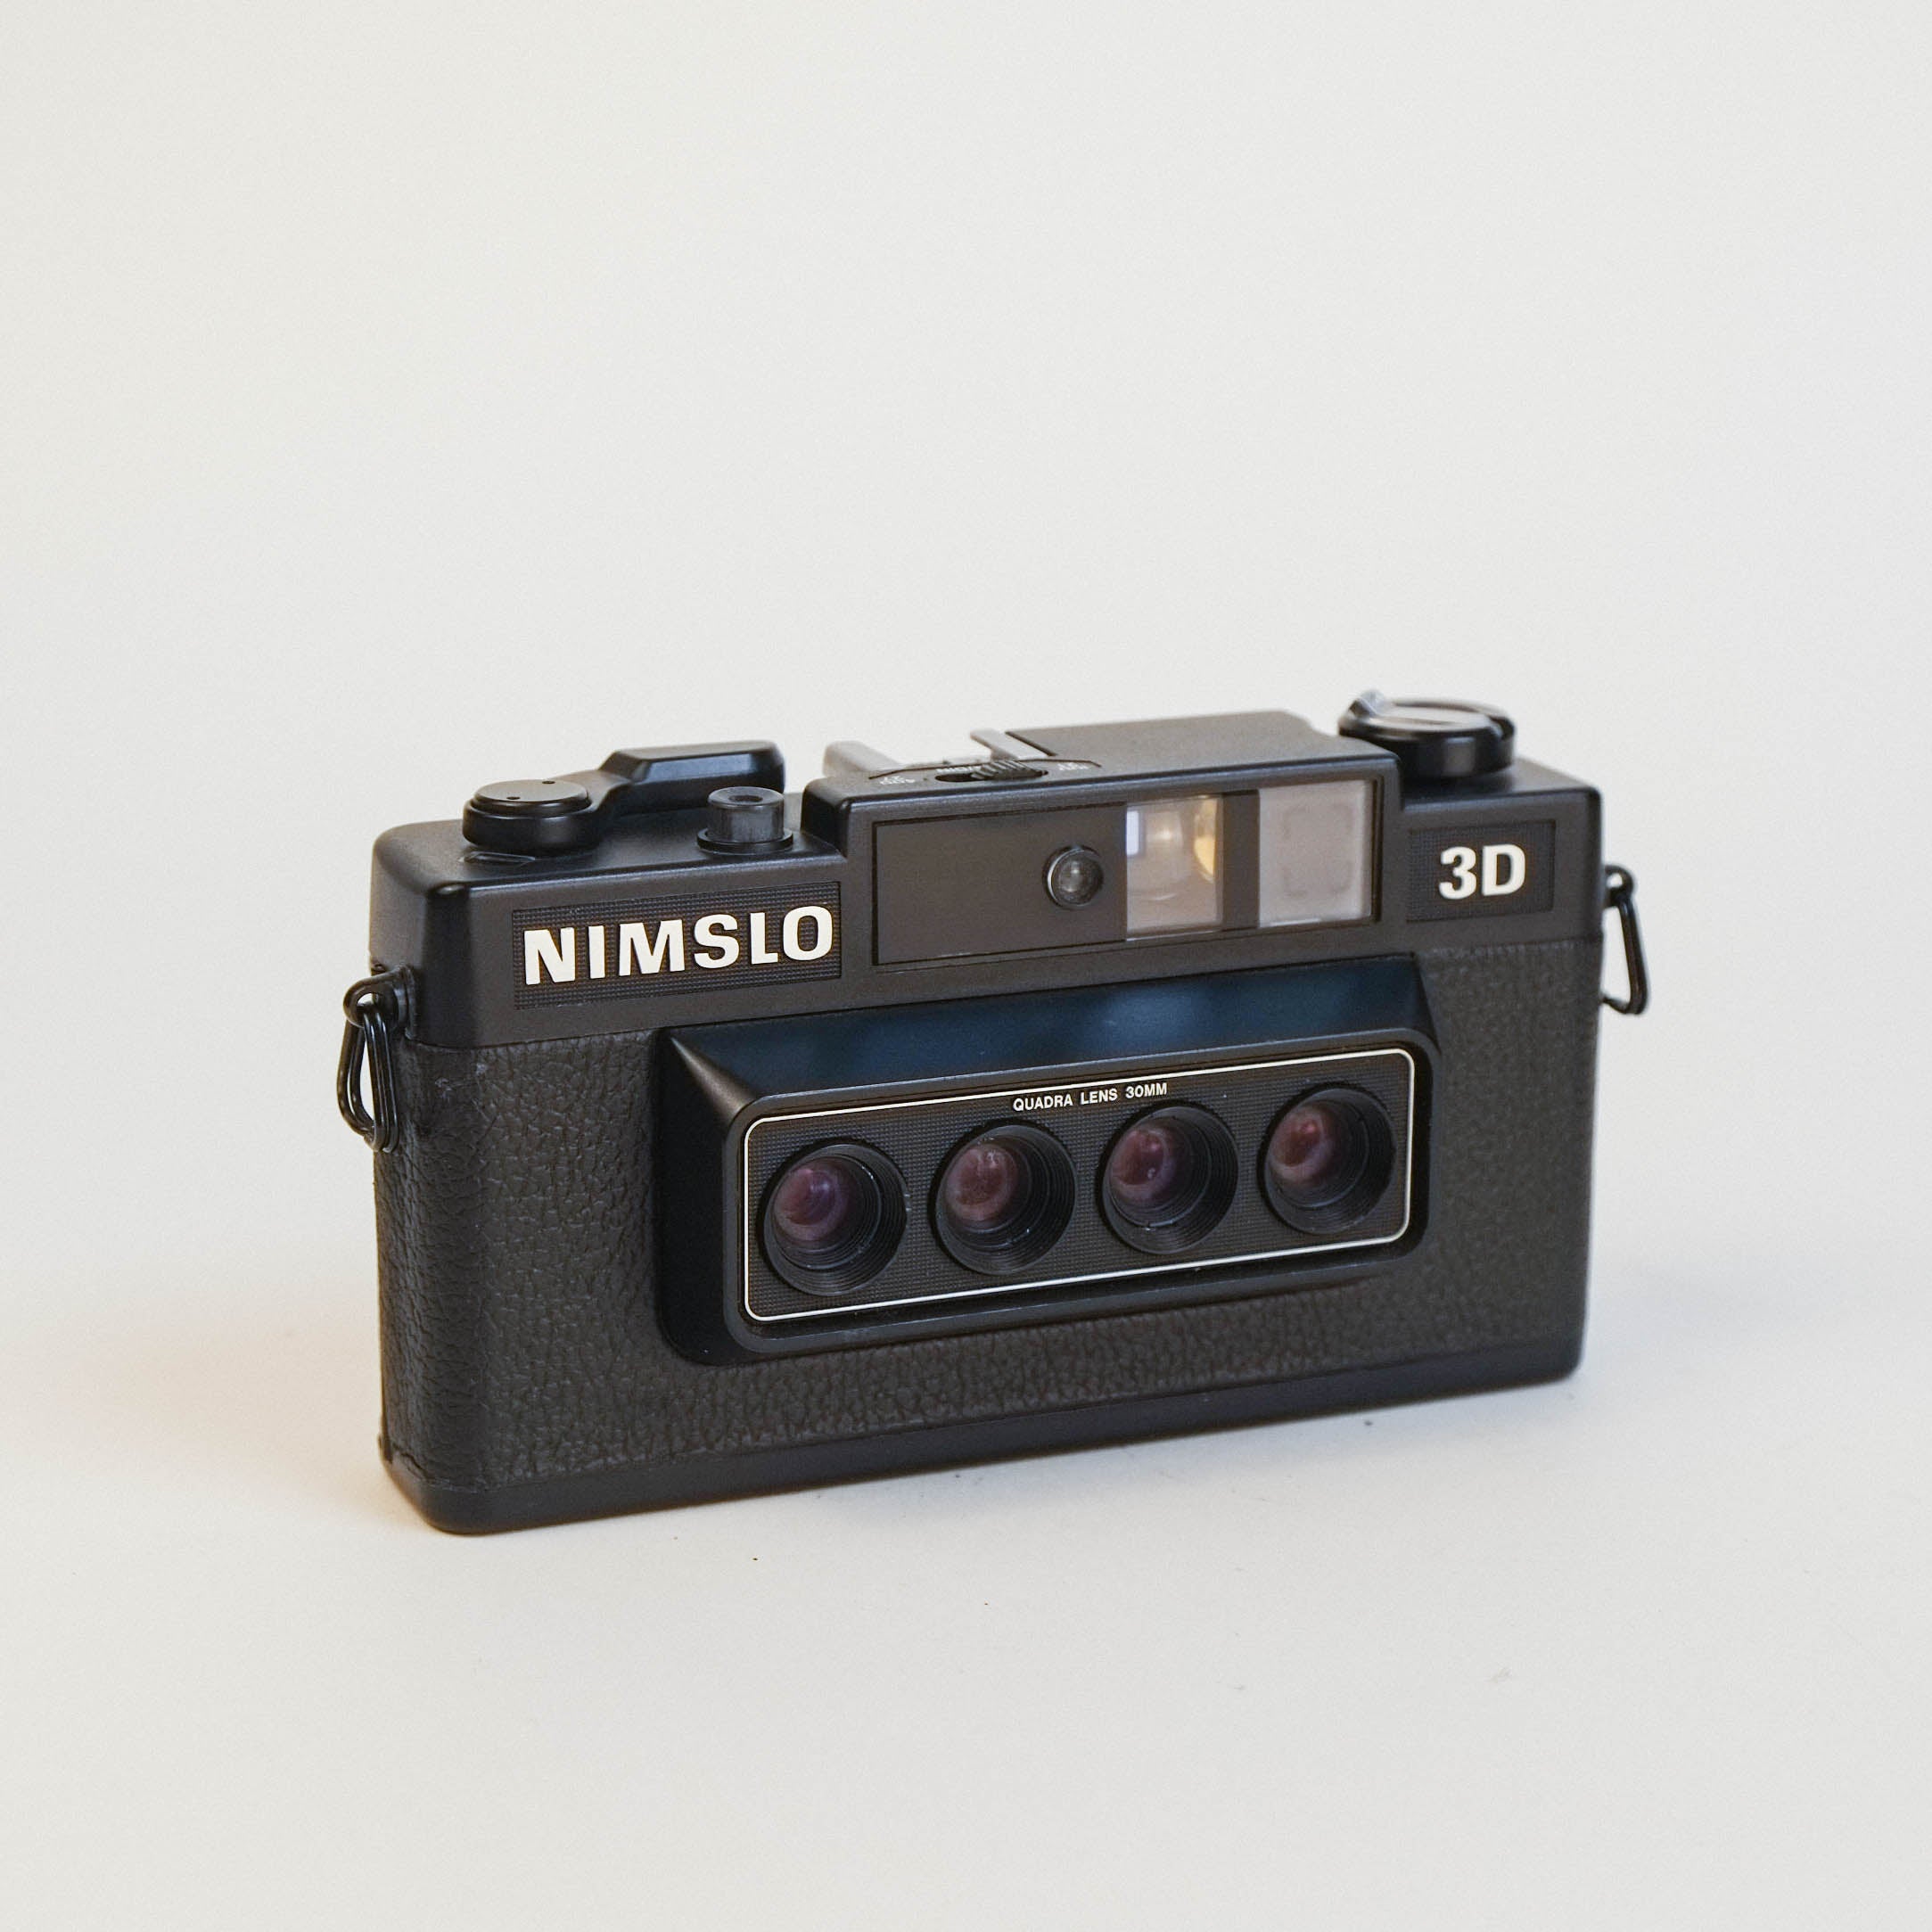 Nimslo 3D 35mm point-and-shoot film camera – Clicque Camera Co.